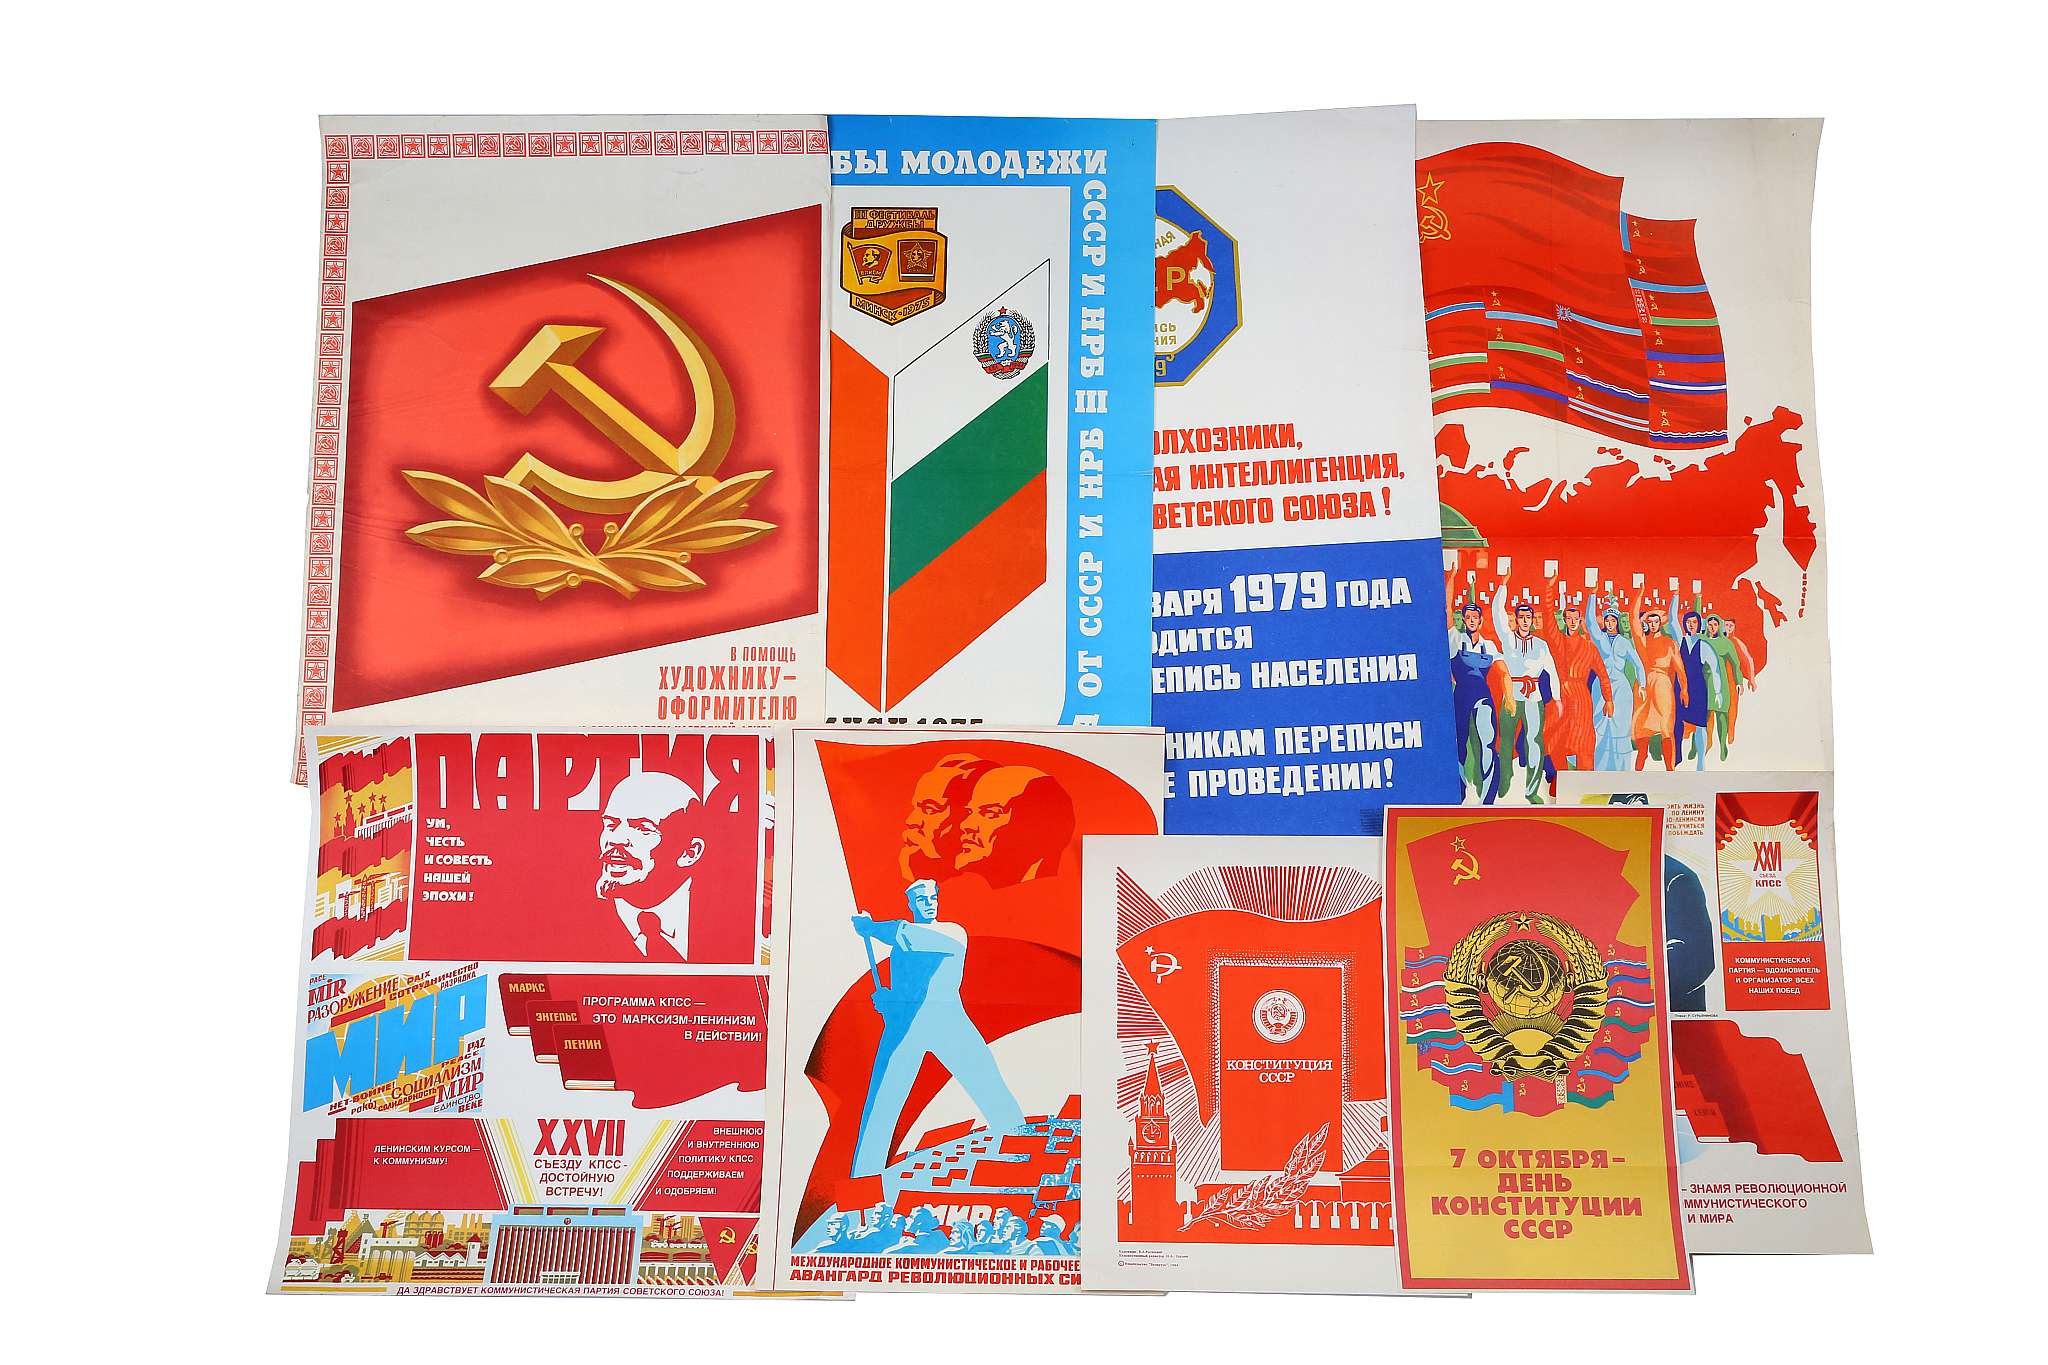 A SET OF 9 VINTAGE SOVIET PROPAGANDA POSTERS AND ILLUSTRATIONS, themed on Leninism, October